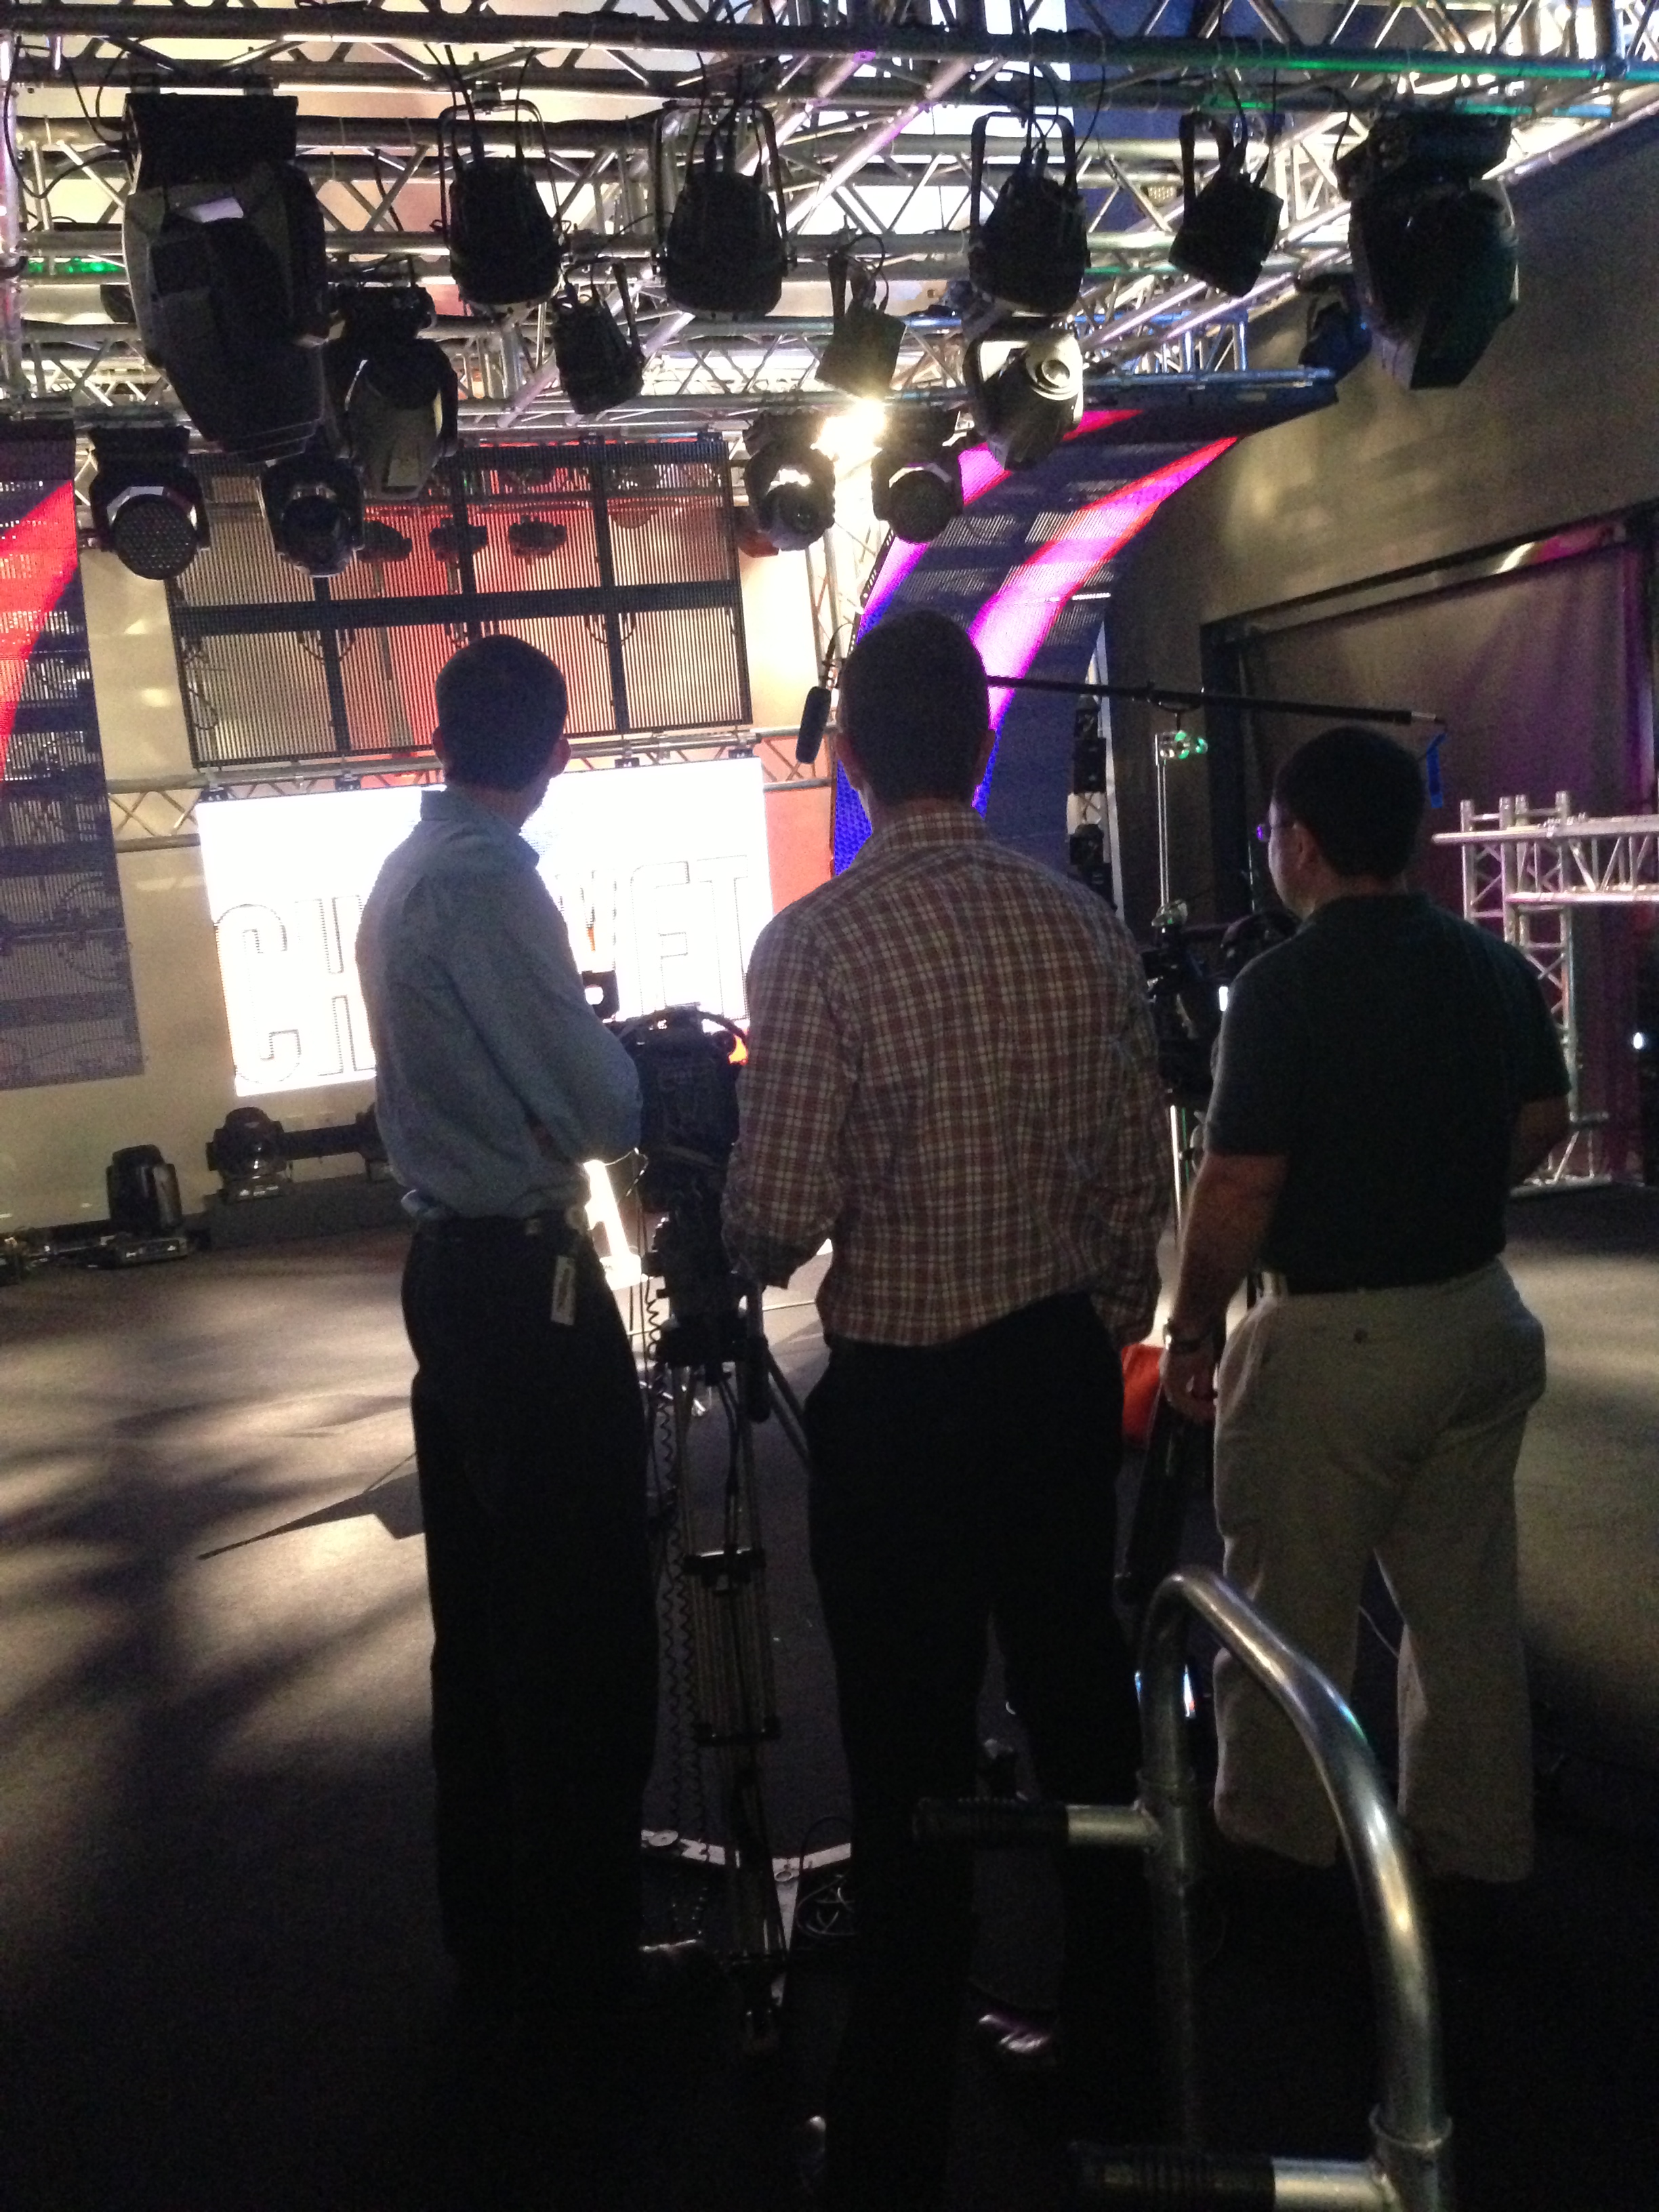 JM Family crew setting up in front of CHAUVET  Professional VIP video products under a full Chauvet rig.